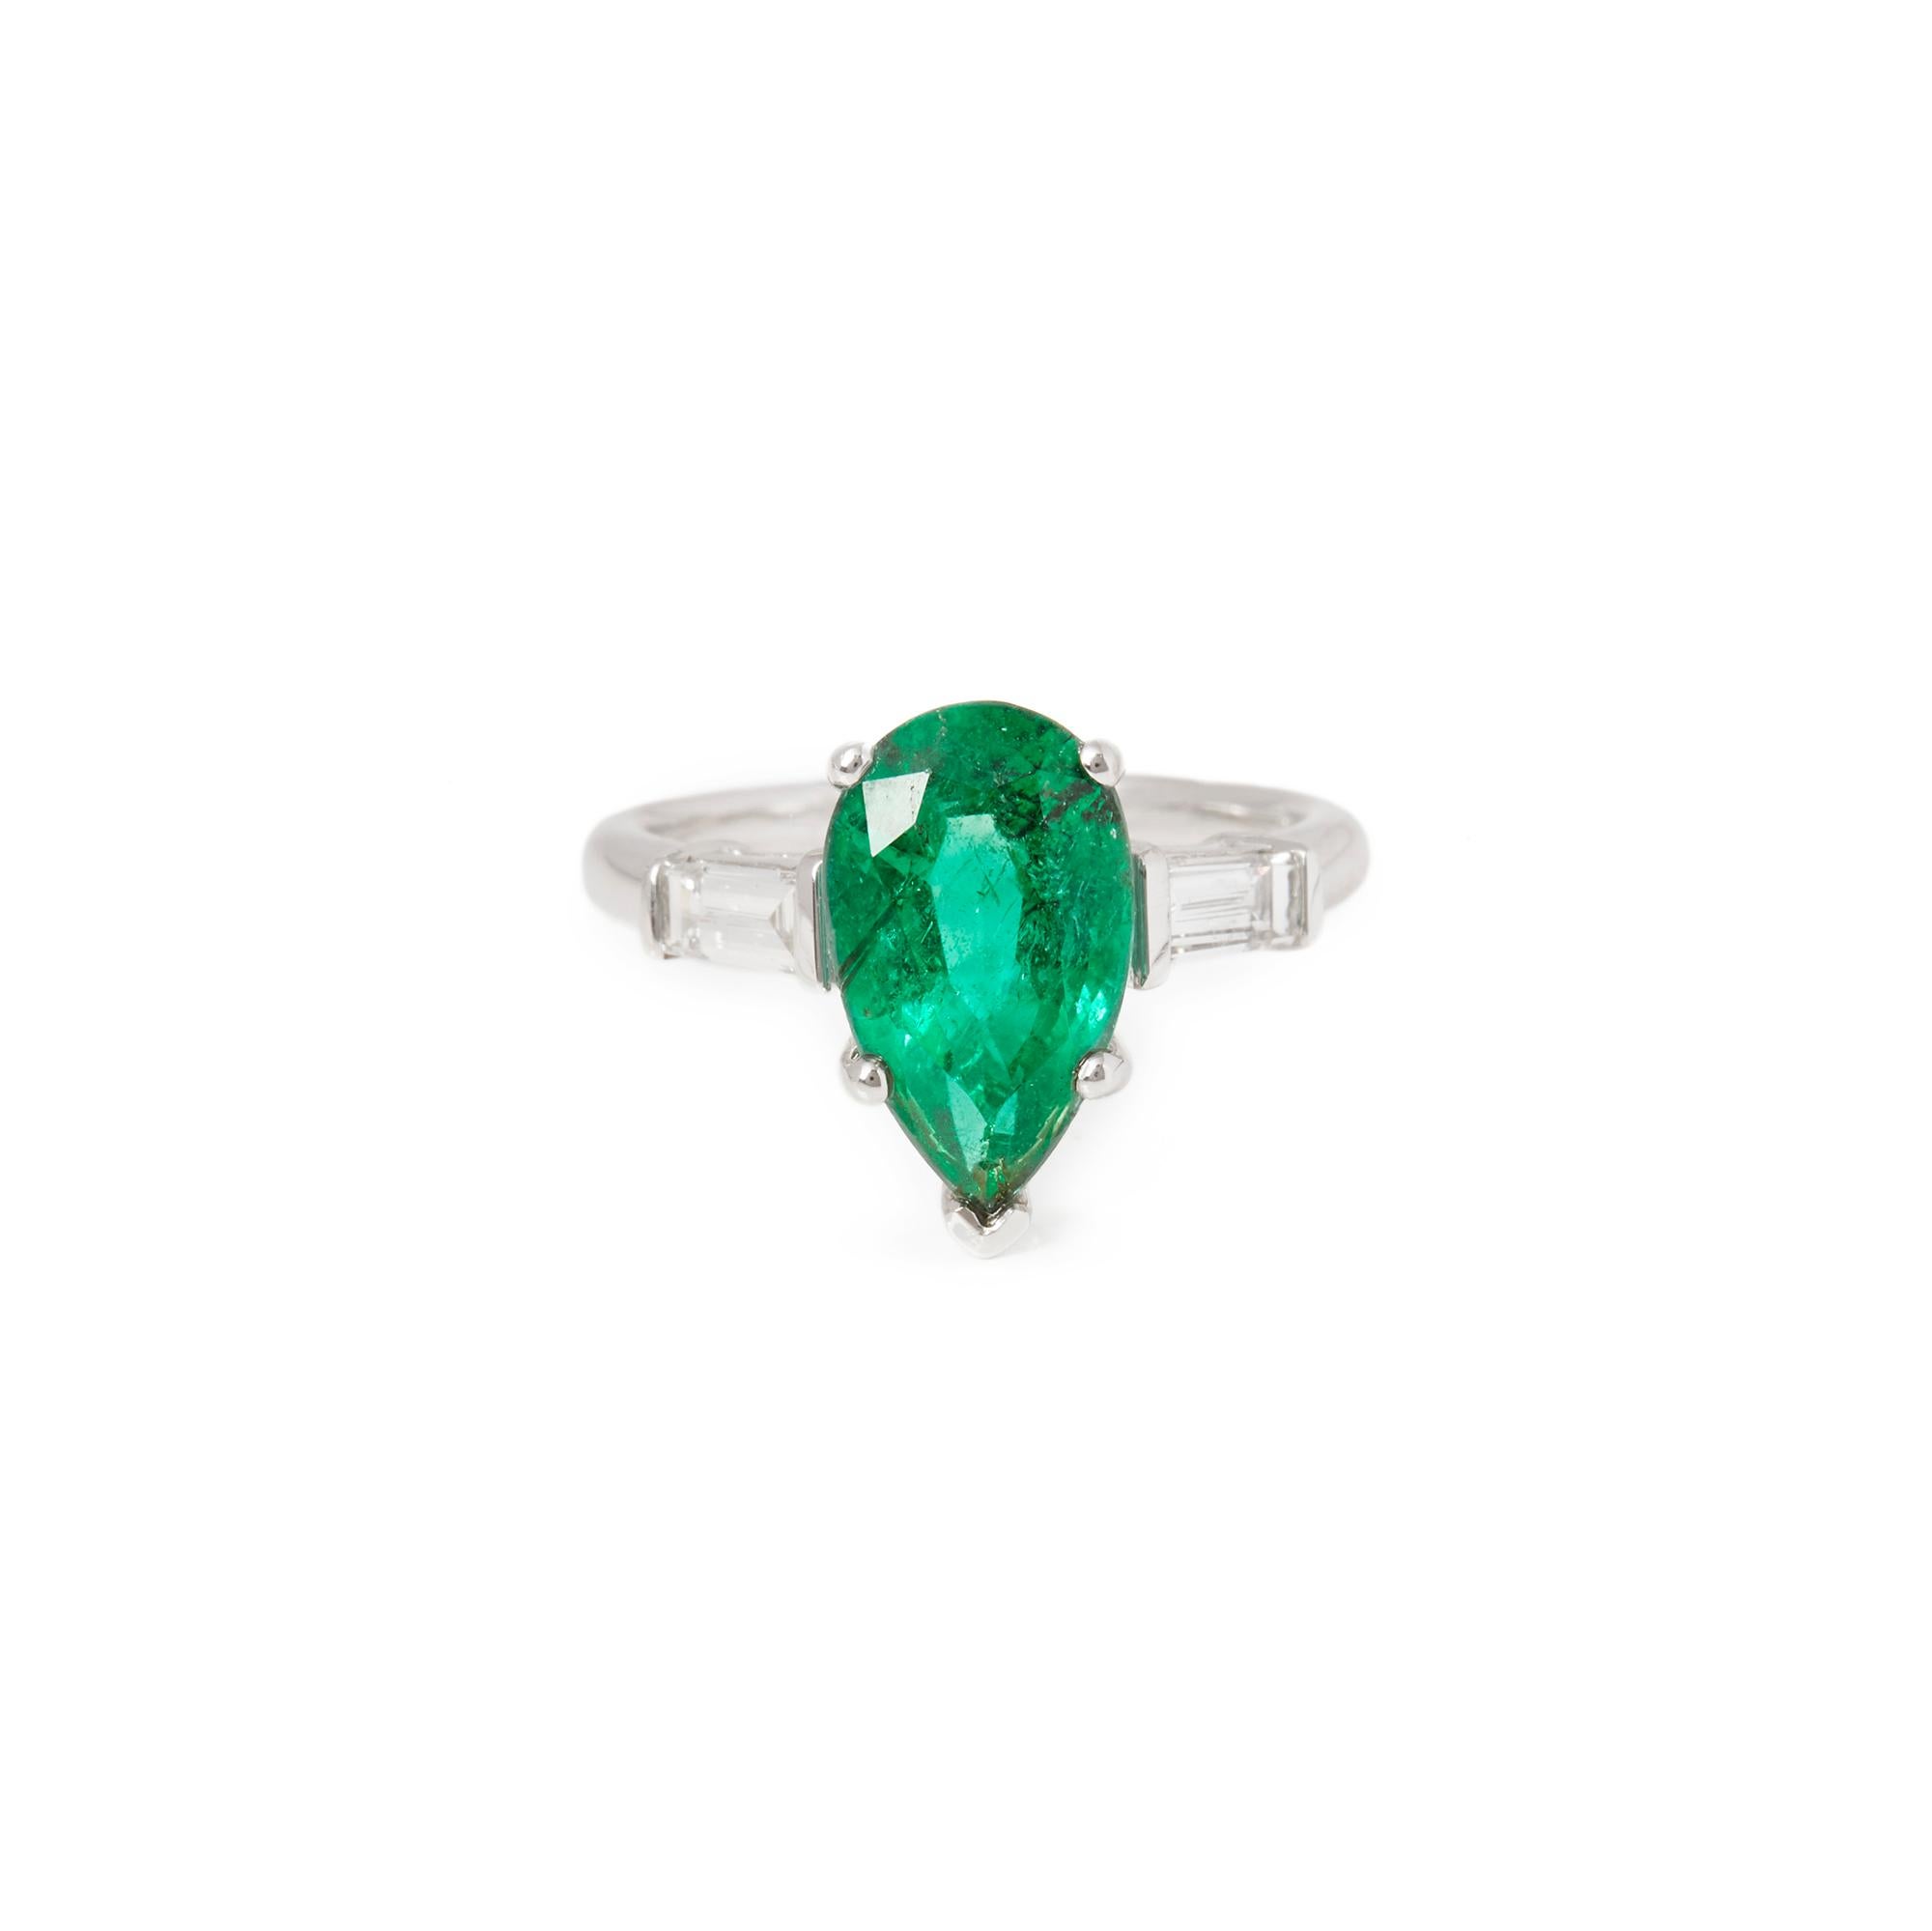 This ring is from the private collection of gemstone jewellery individually designed by David Jerome. It features a pear cut emerald set with diamonds. Accompanied by an IGR gem certificate. UK ring size M. EU ring size 53. US ring size 6 1/4. 